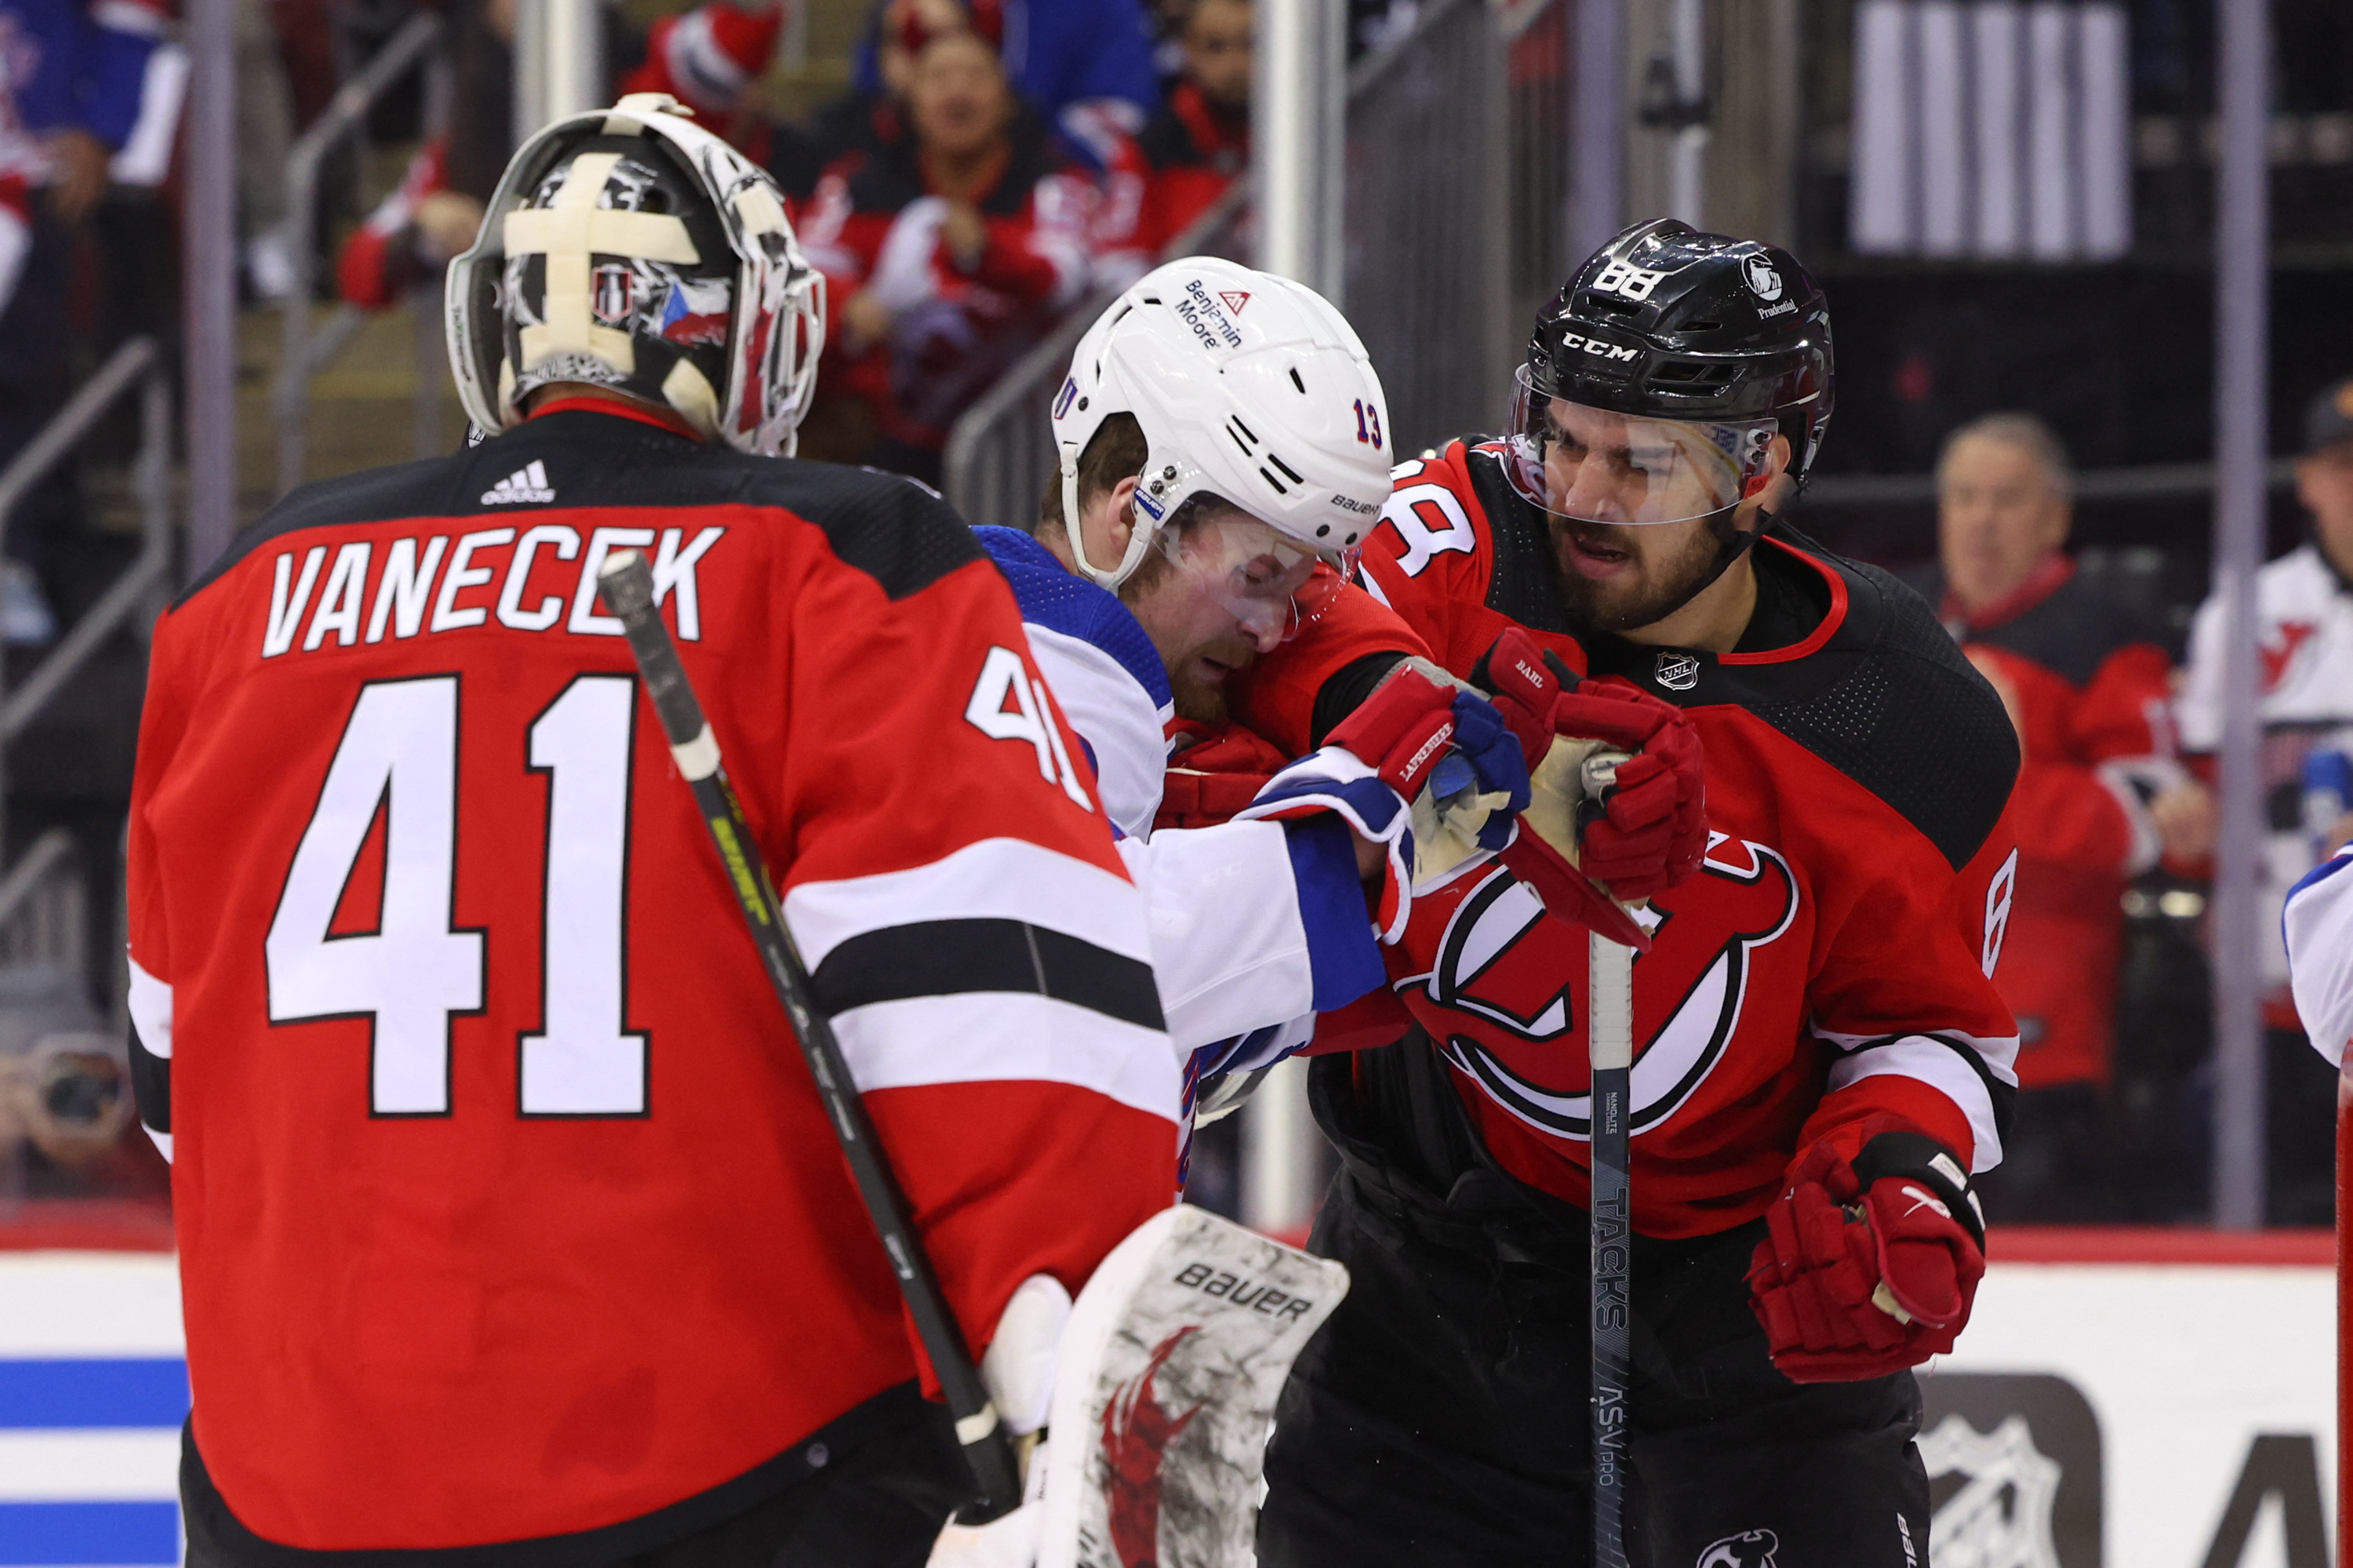 Devils look rattled (and inexperienced) in Game 1 loss to Rangers, 5-1 